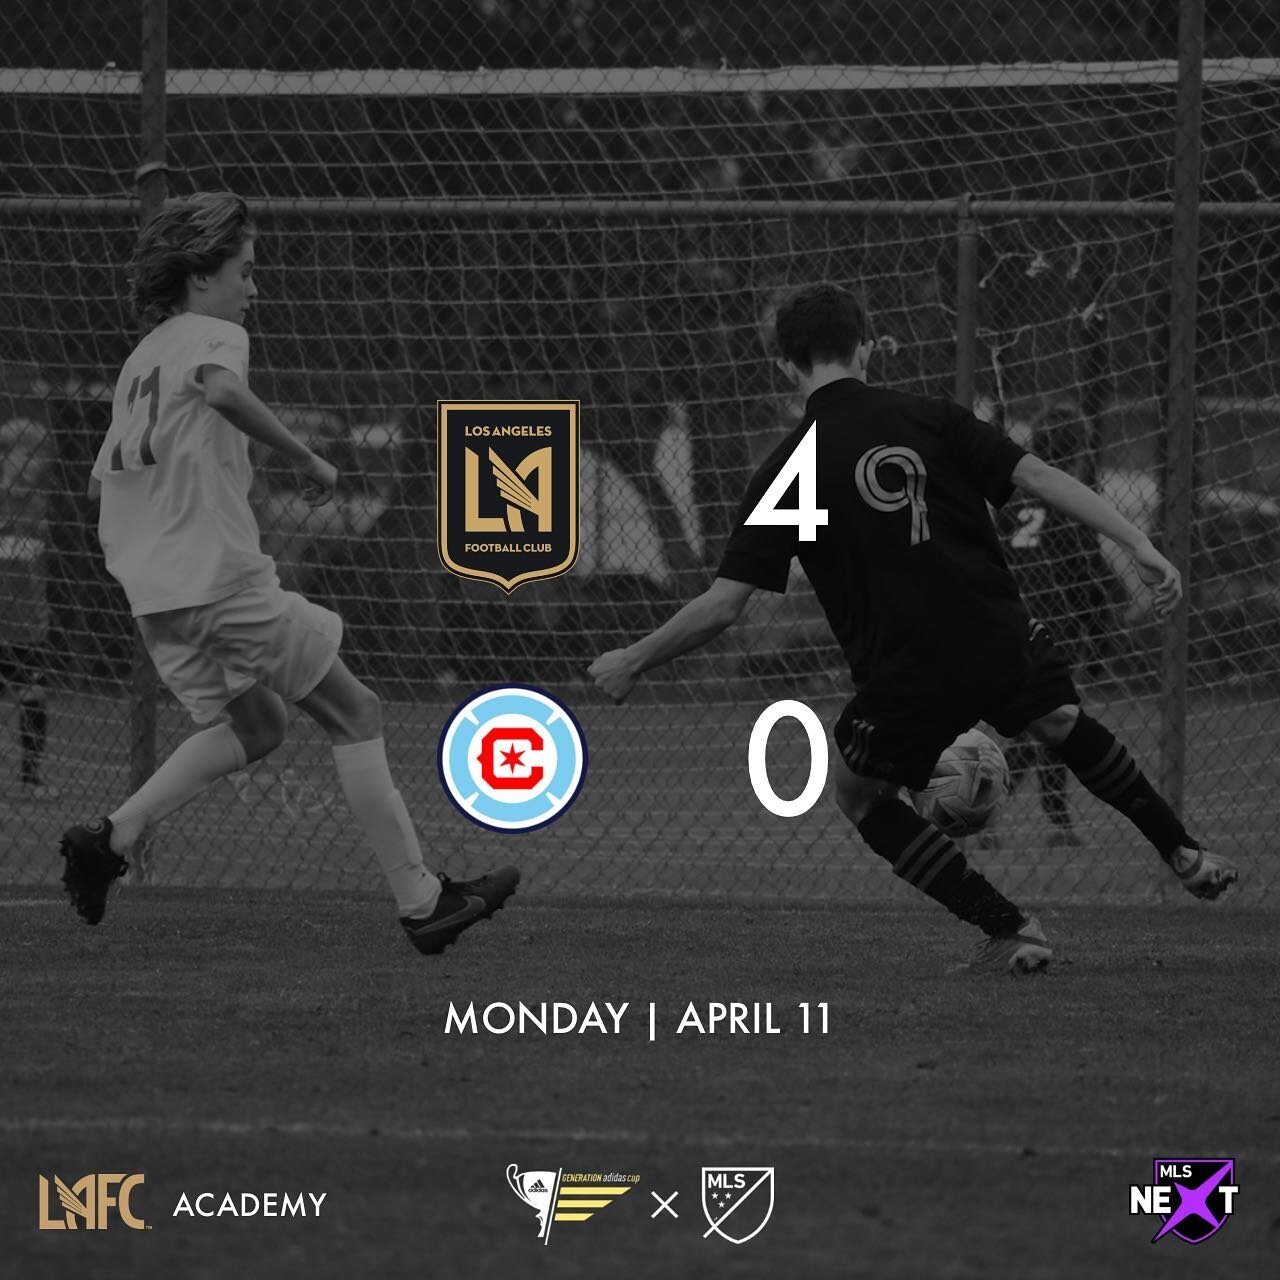 Great to be back. Onto the round of 16 tonight vs. CF Montr&eacute;al at 7pm CST. @lafcacademy @mlsnext #U15 #generationadidascup2022